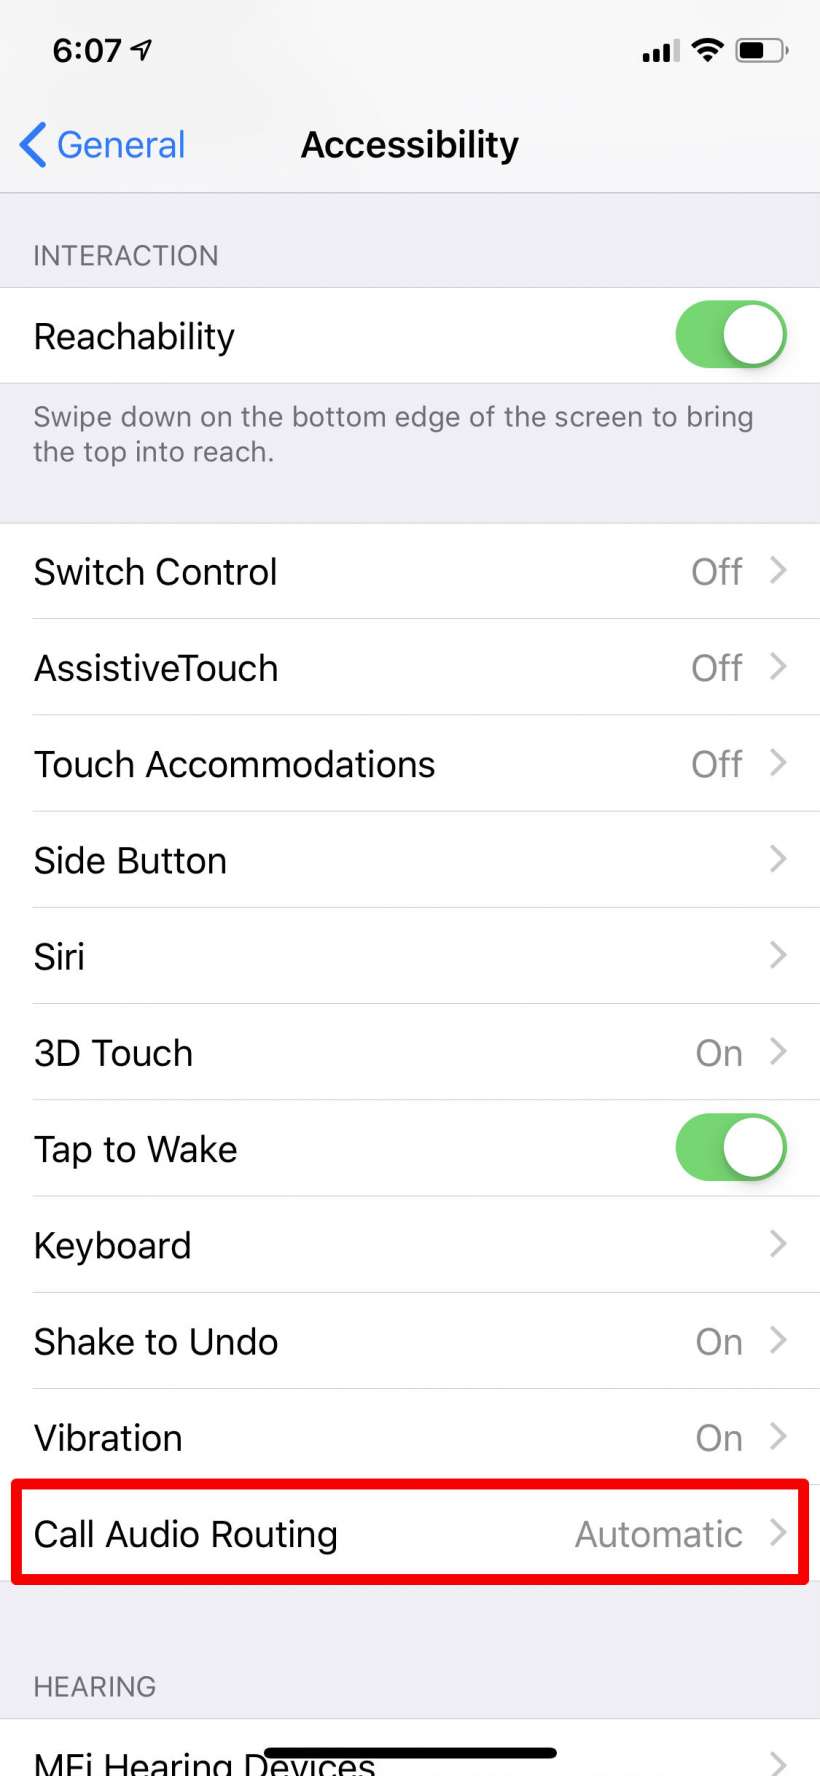 How to automatically answer calls with speakerphone on iPhone.